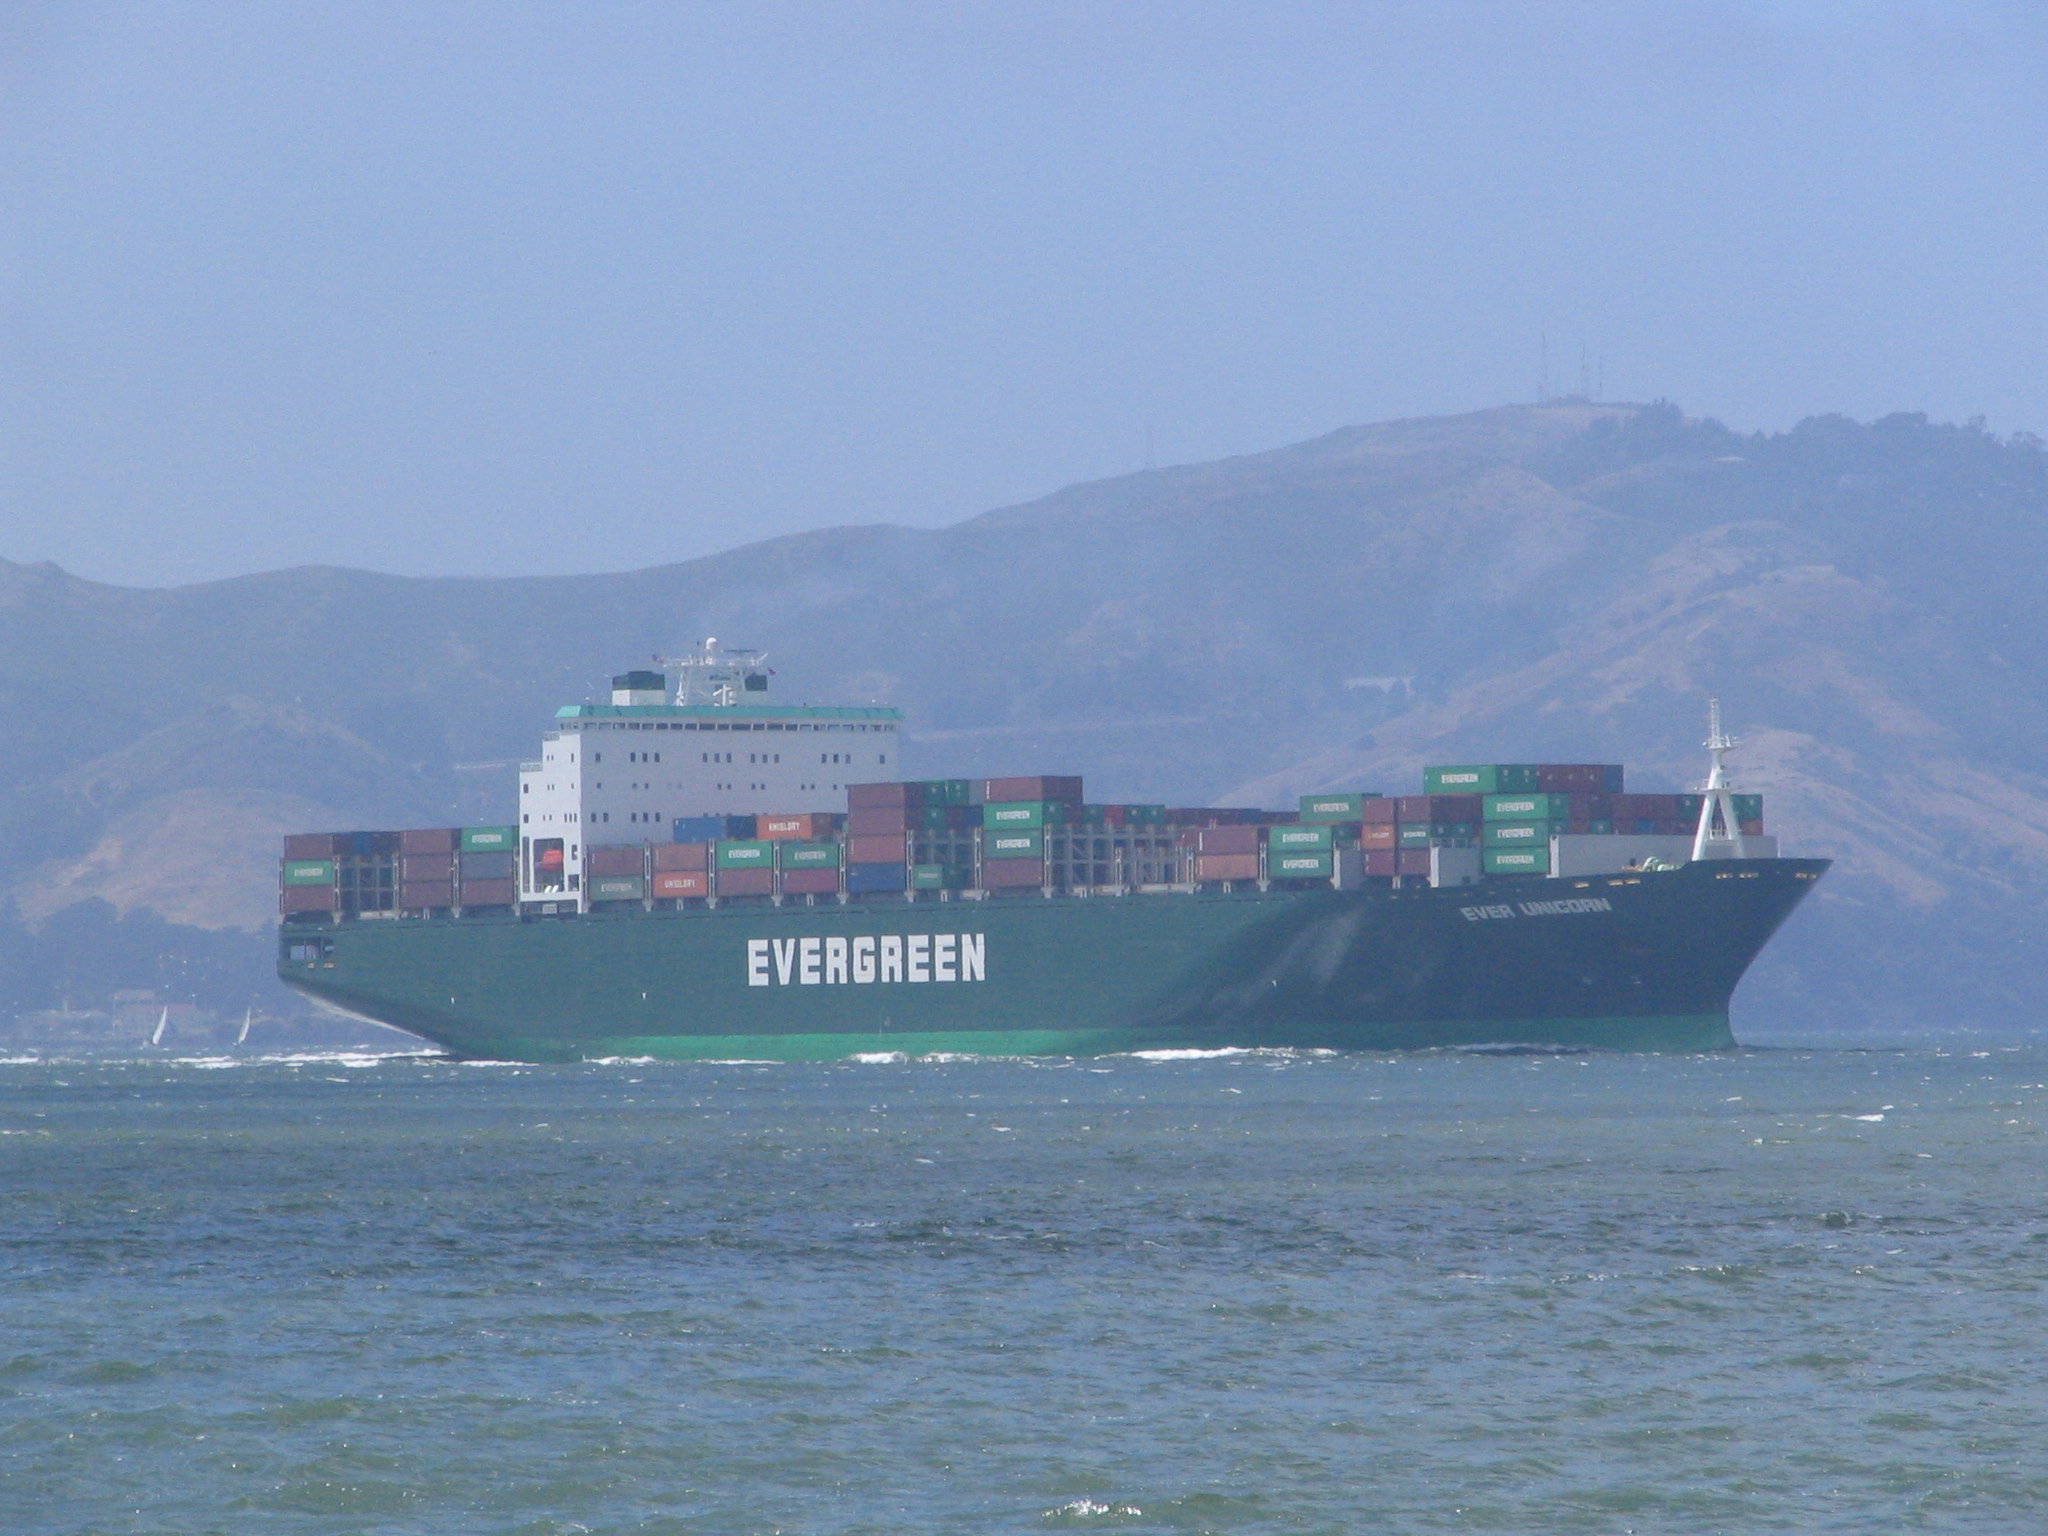 a big green ship traveling across a body of water